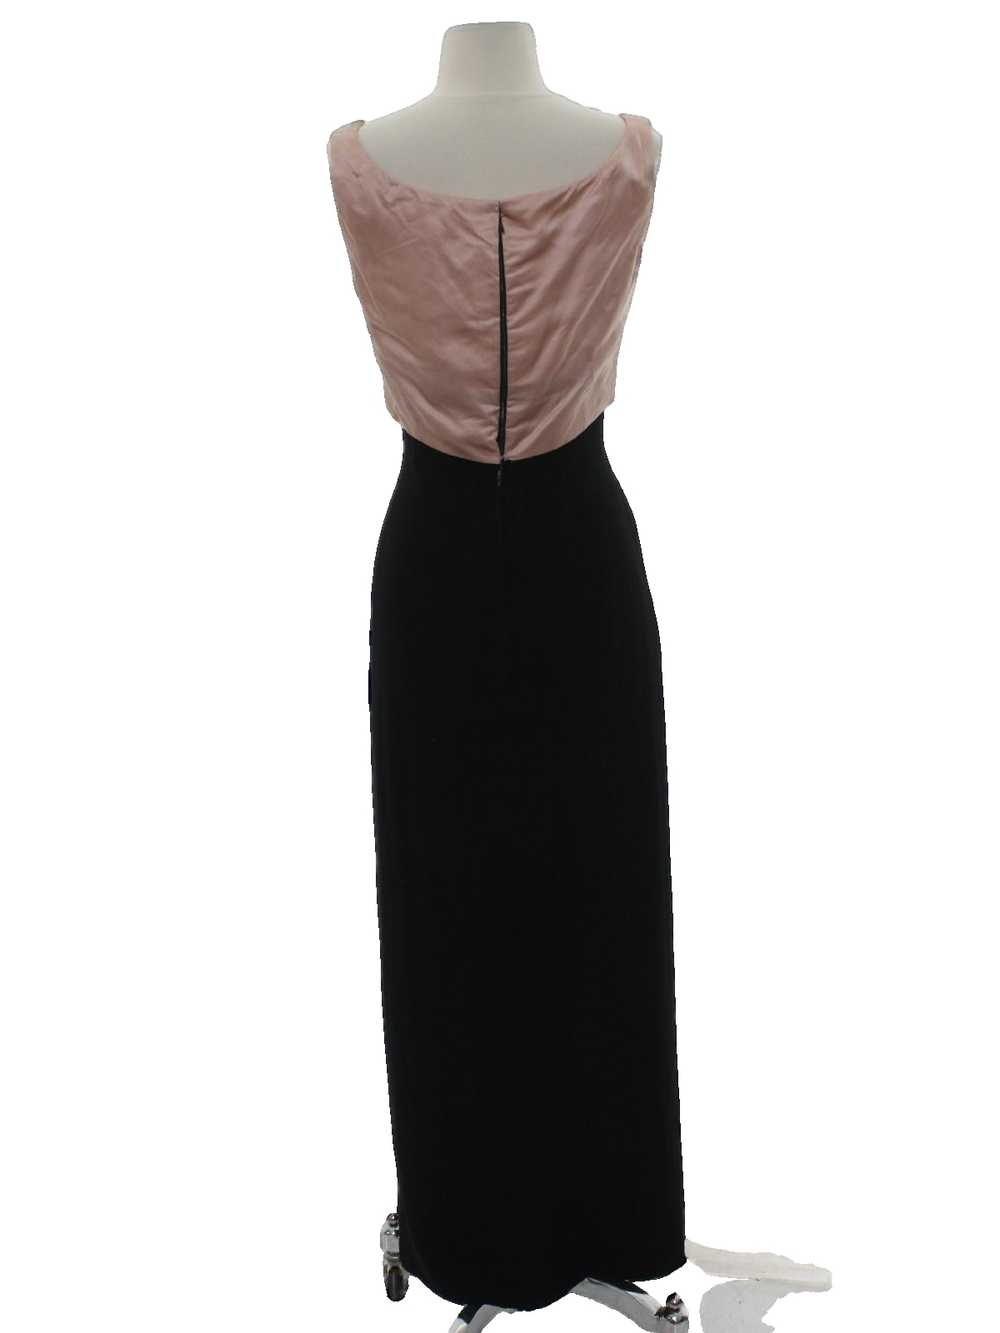 1950's Maxi Wiggle Prom Or Cocktail Dress - image 3